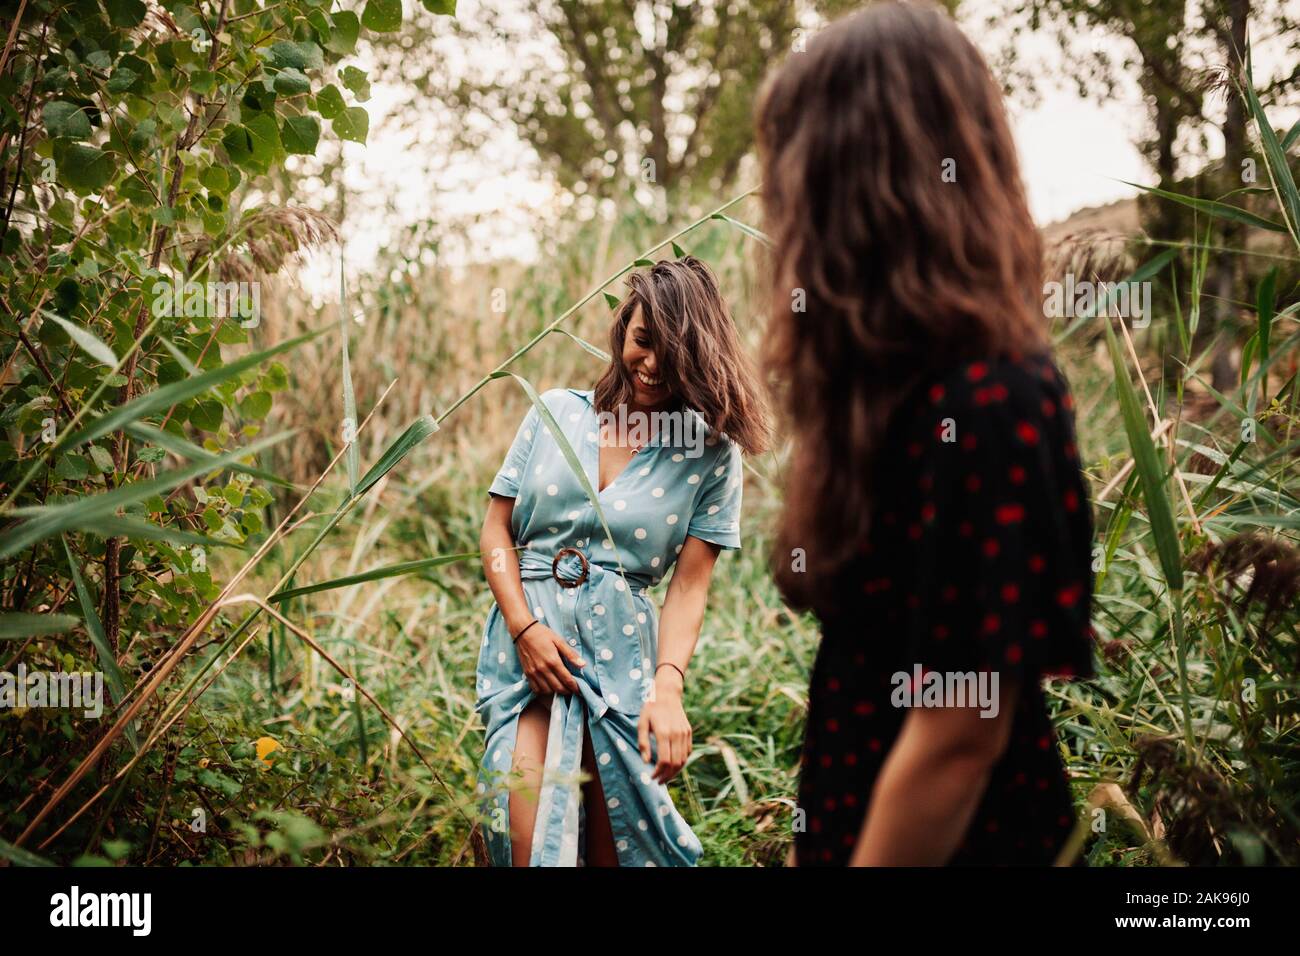 Two young women walking through the field the field wearing dresses and sneakers Stock Photo